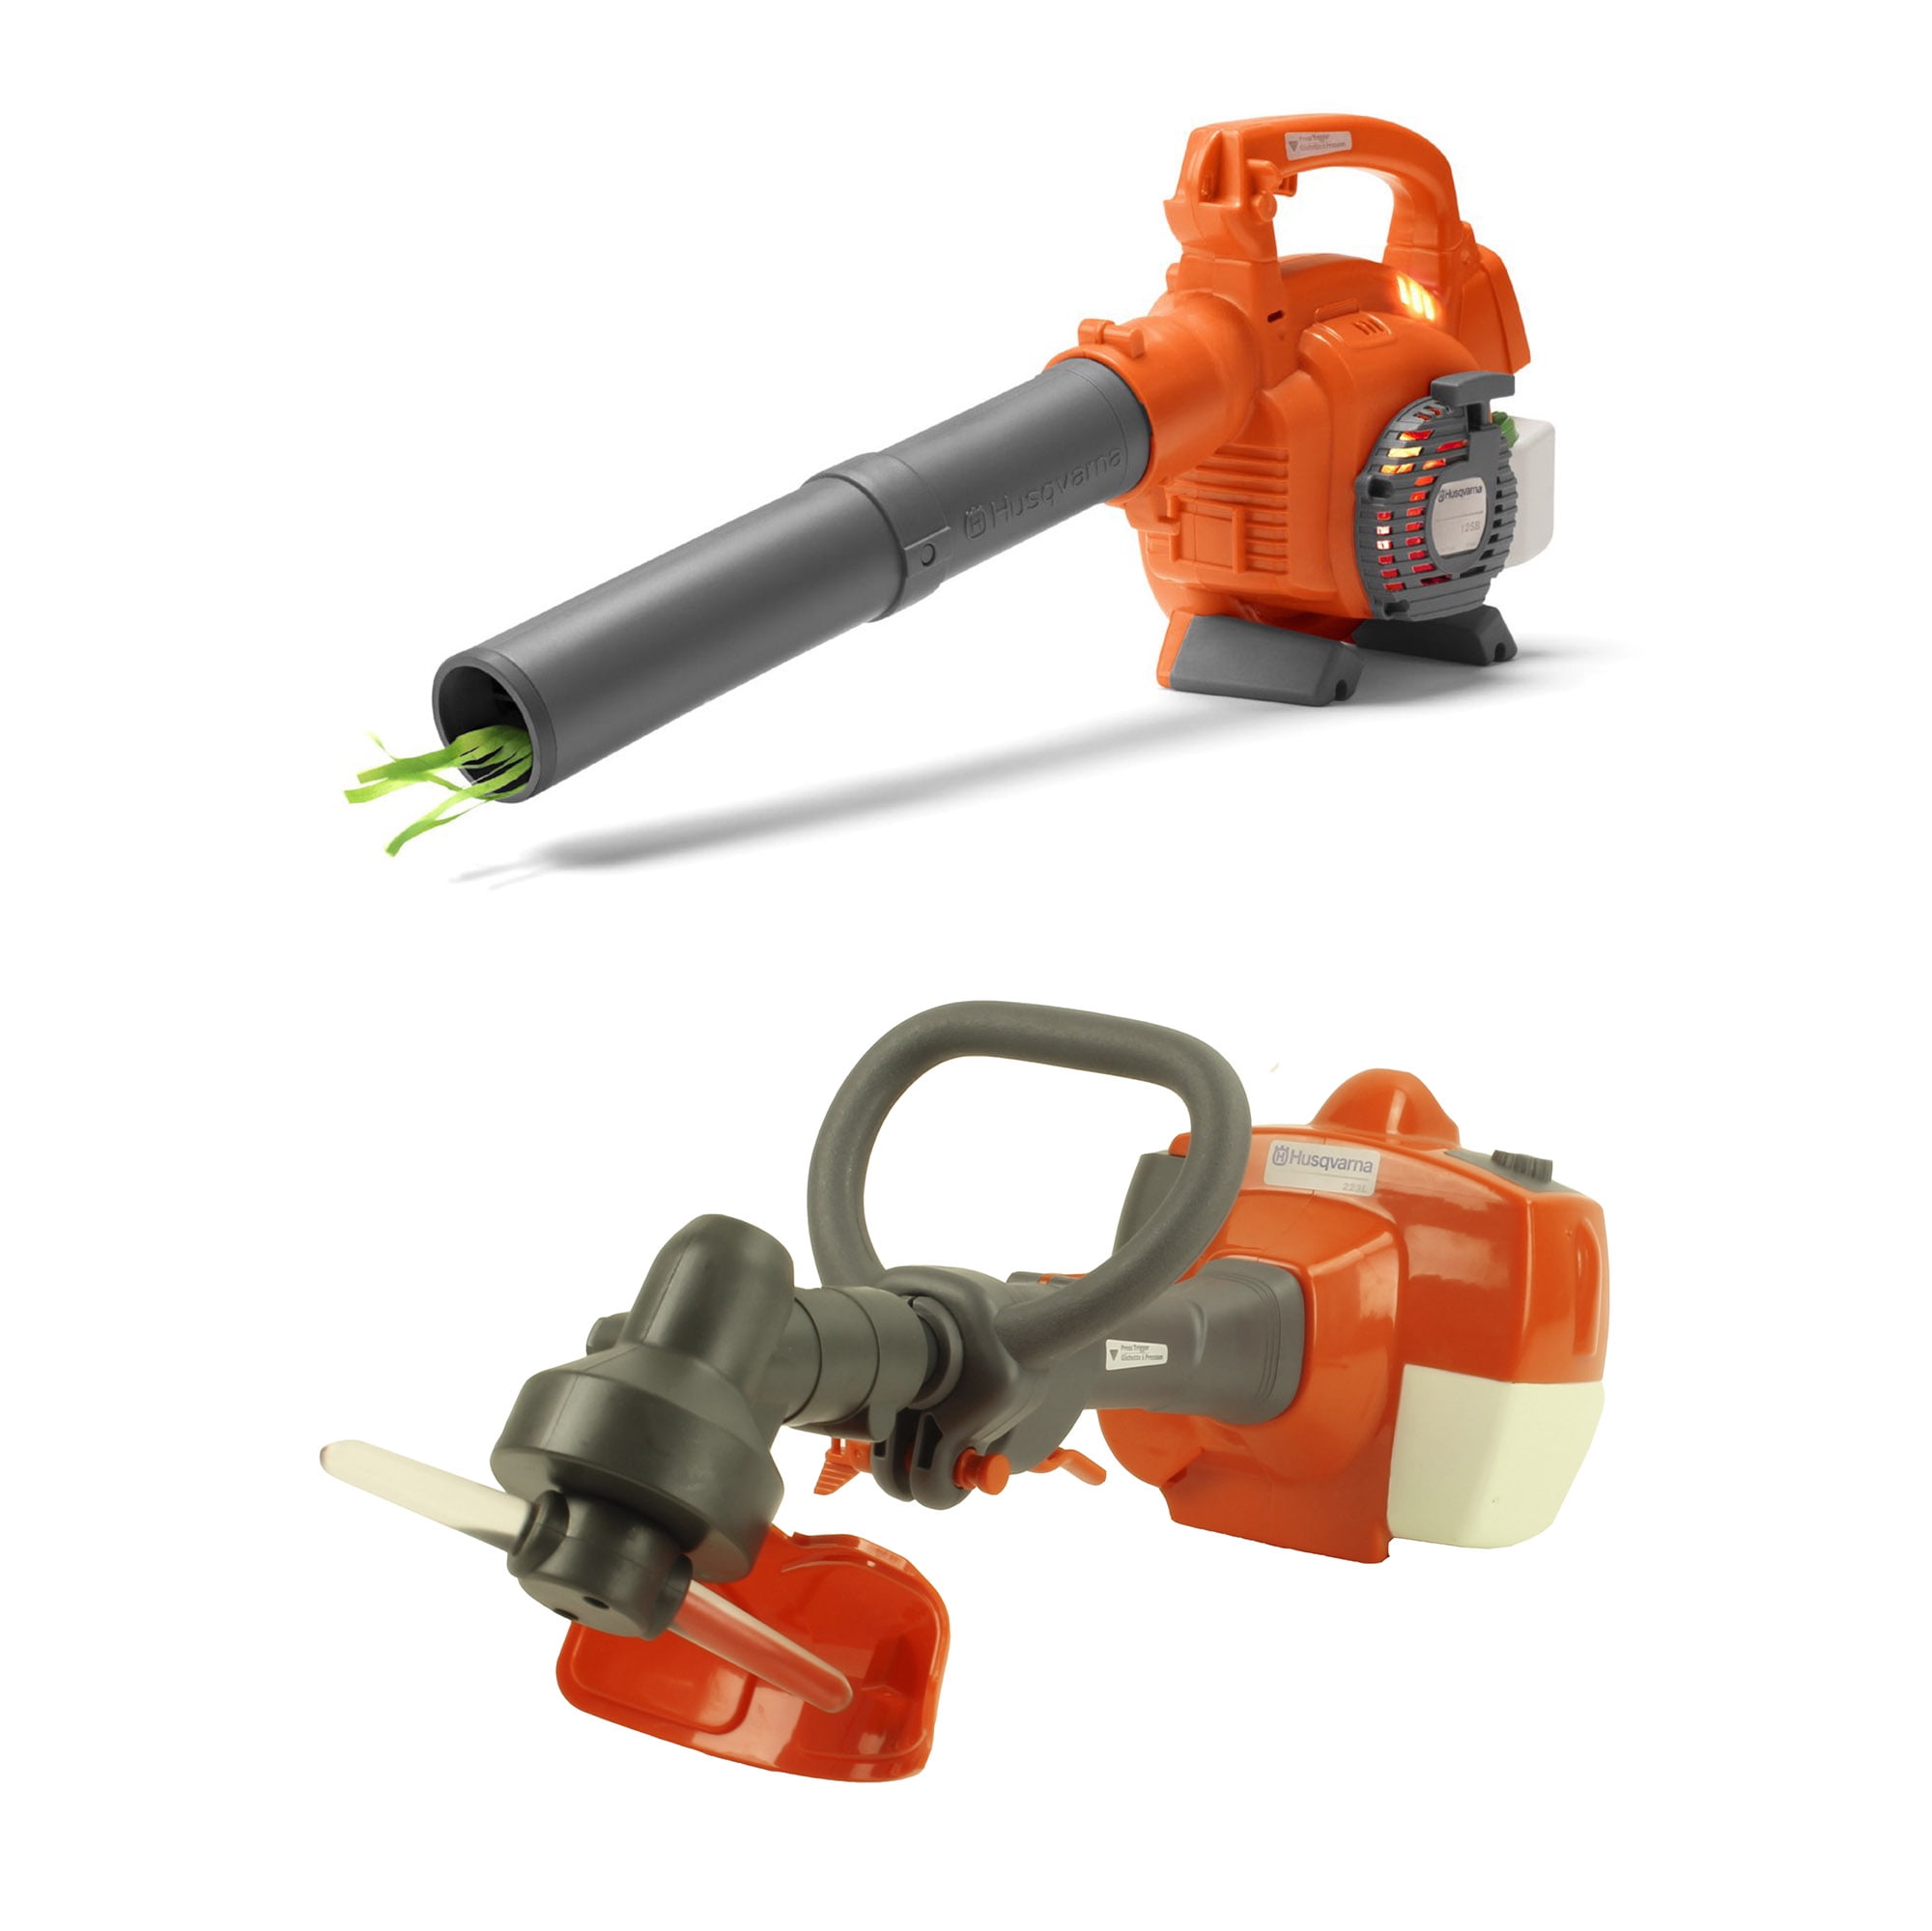 Husqvarna 125B Kids Toy Battery Operated Leaf Blower with Real Actions 2 Pack